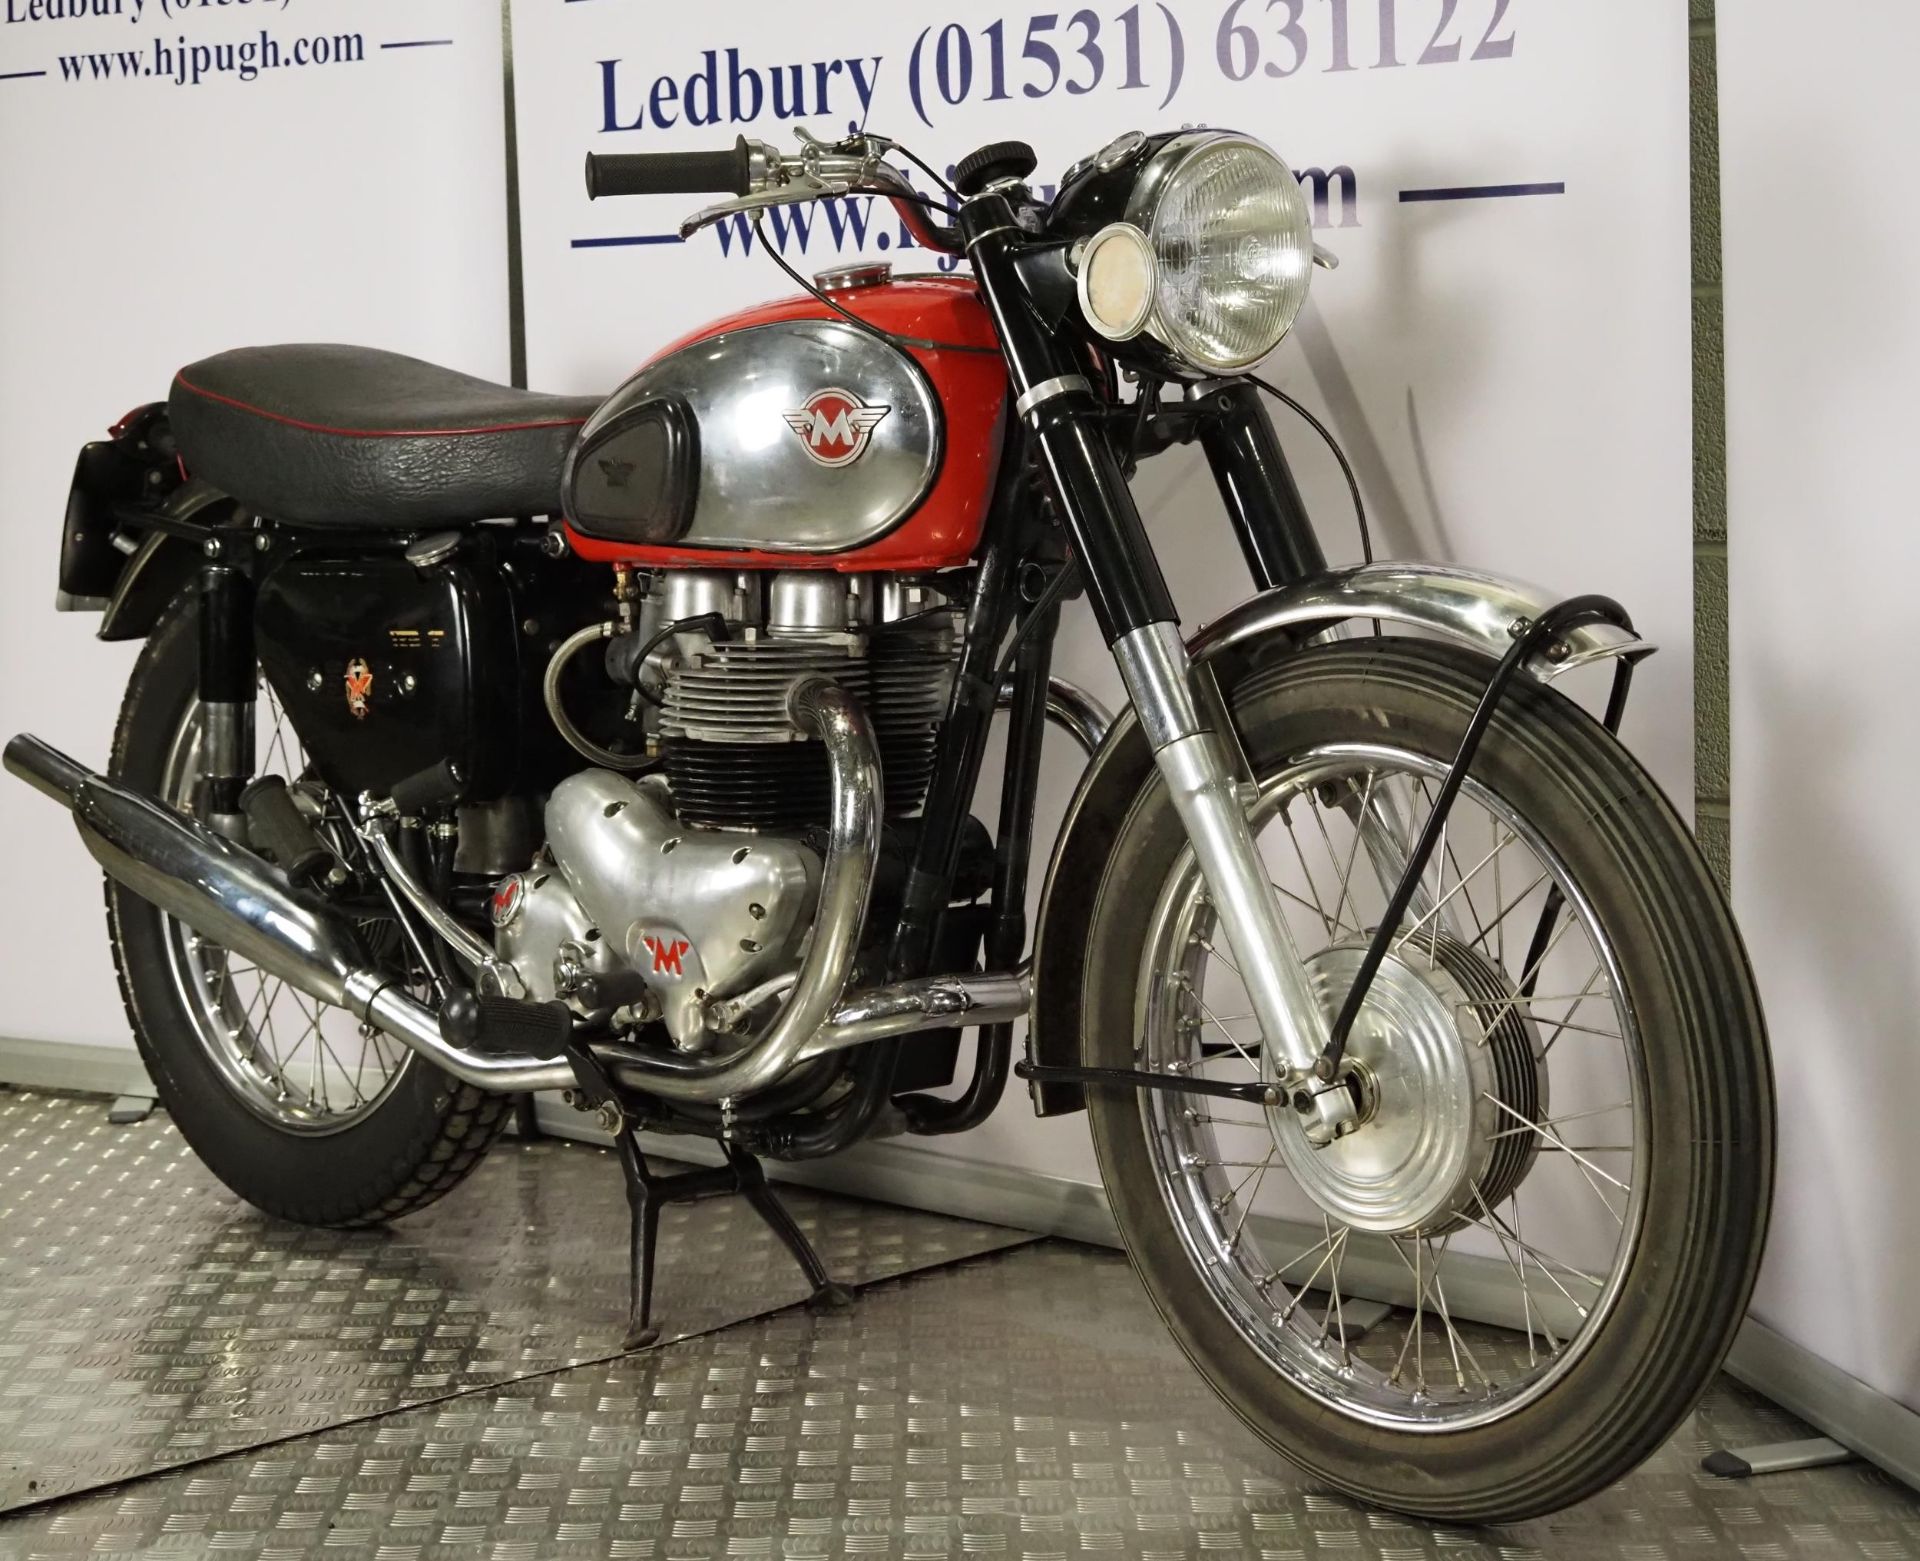 Matchless CSR650 motorcycle. 1960. 650cc. Frame No. 73603 Engine No. G12CSX2823 Was last ridden in - Image 2 of 6